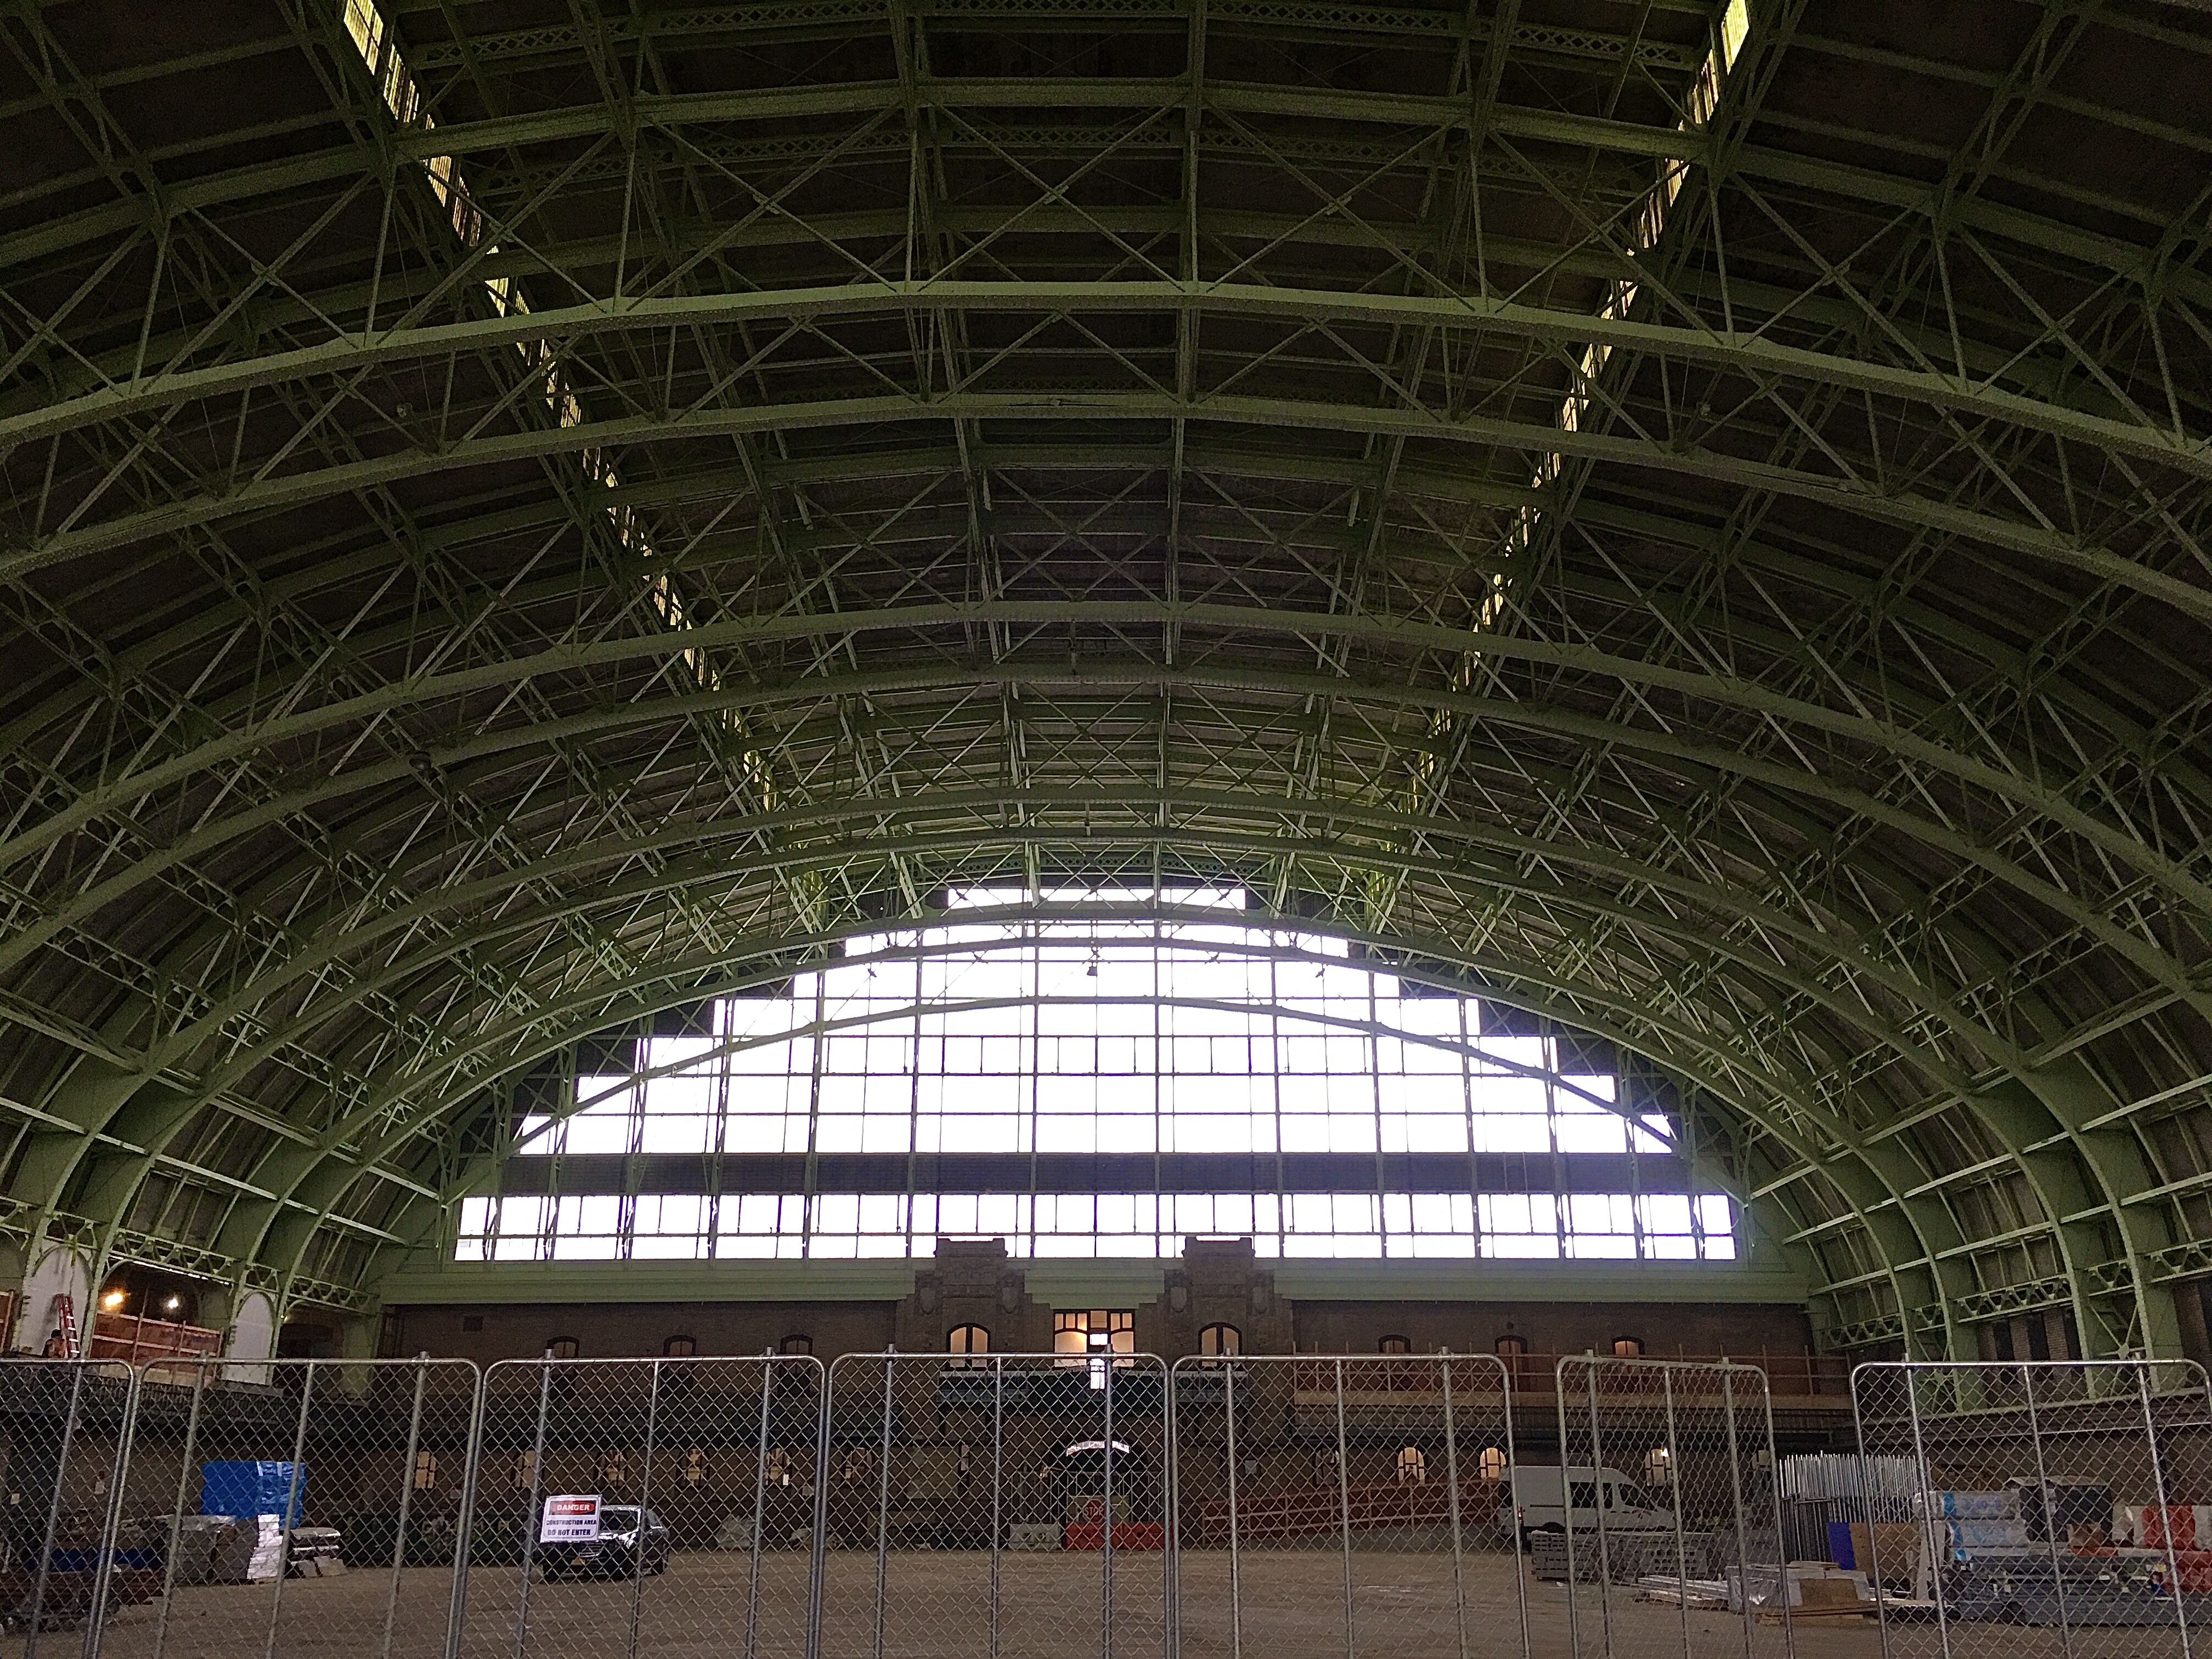 Here’s a glimpse inside the historic Bedford Union Armory, which is being redeveloped as a gym with new apartments alongside it. Photo: Lore Croghan/Brooklyn Eagle